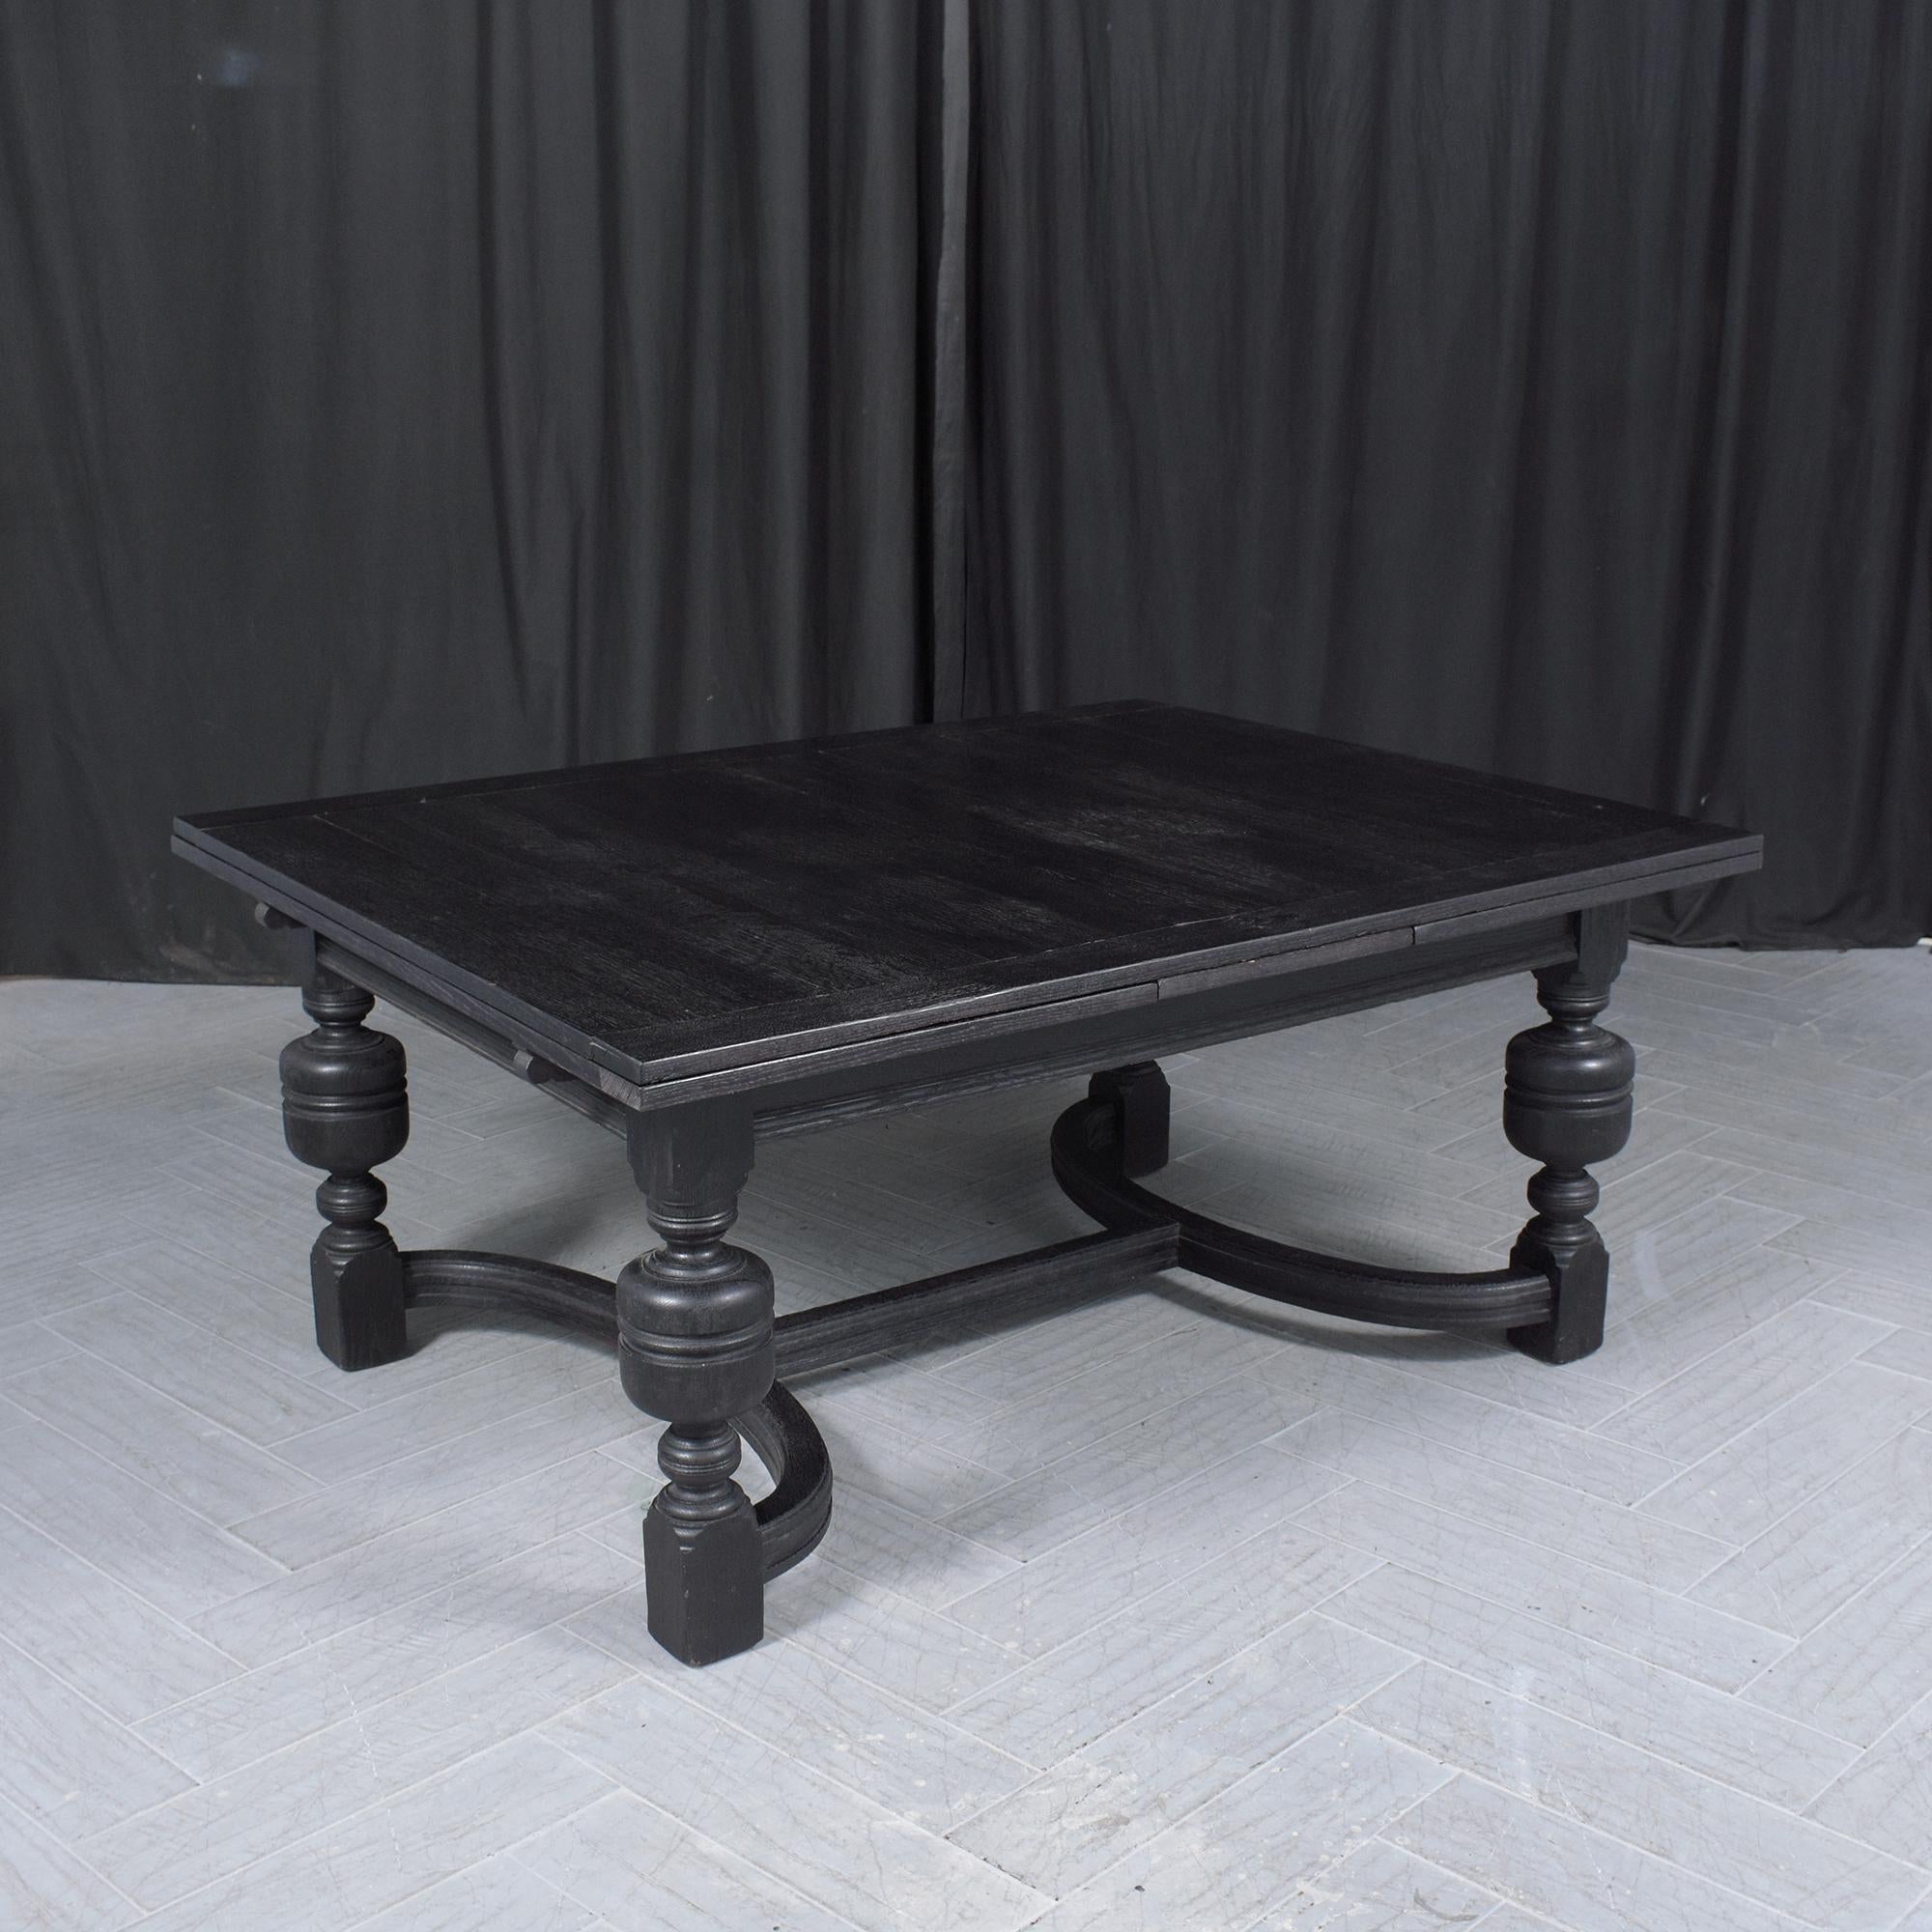 1850s Spanish Extendable Dining Table: Ebonized Solid Wood with French Design For Sale 1